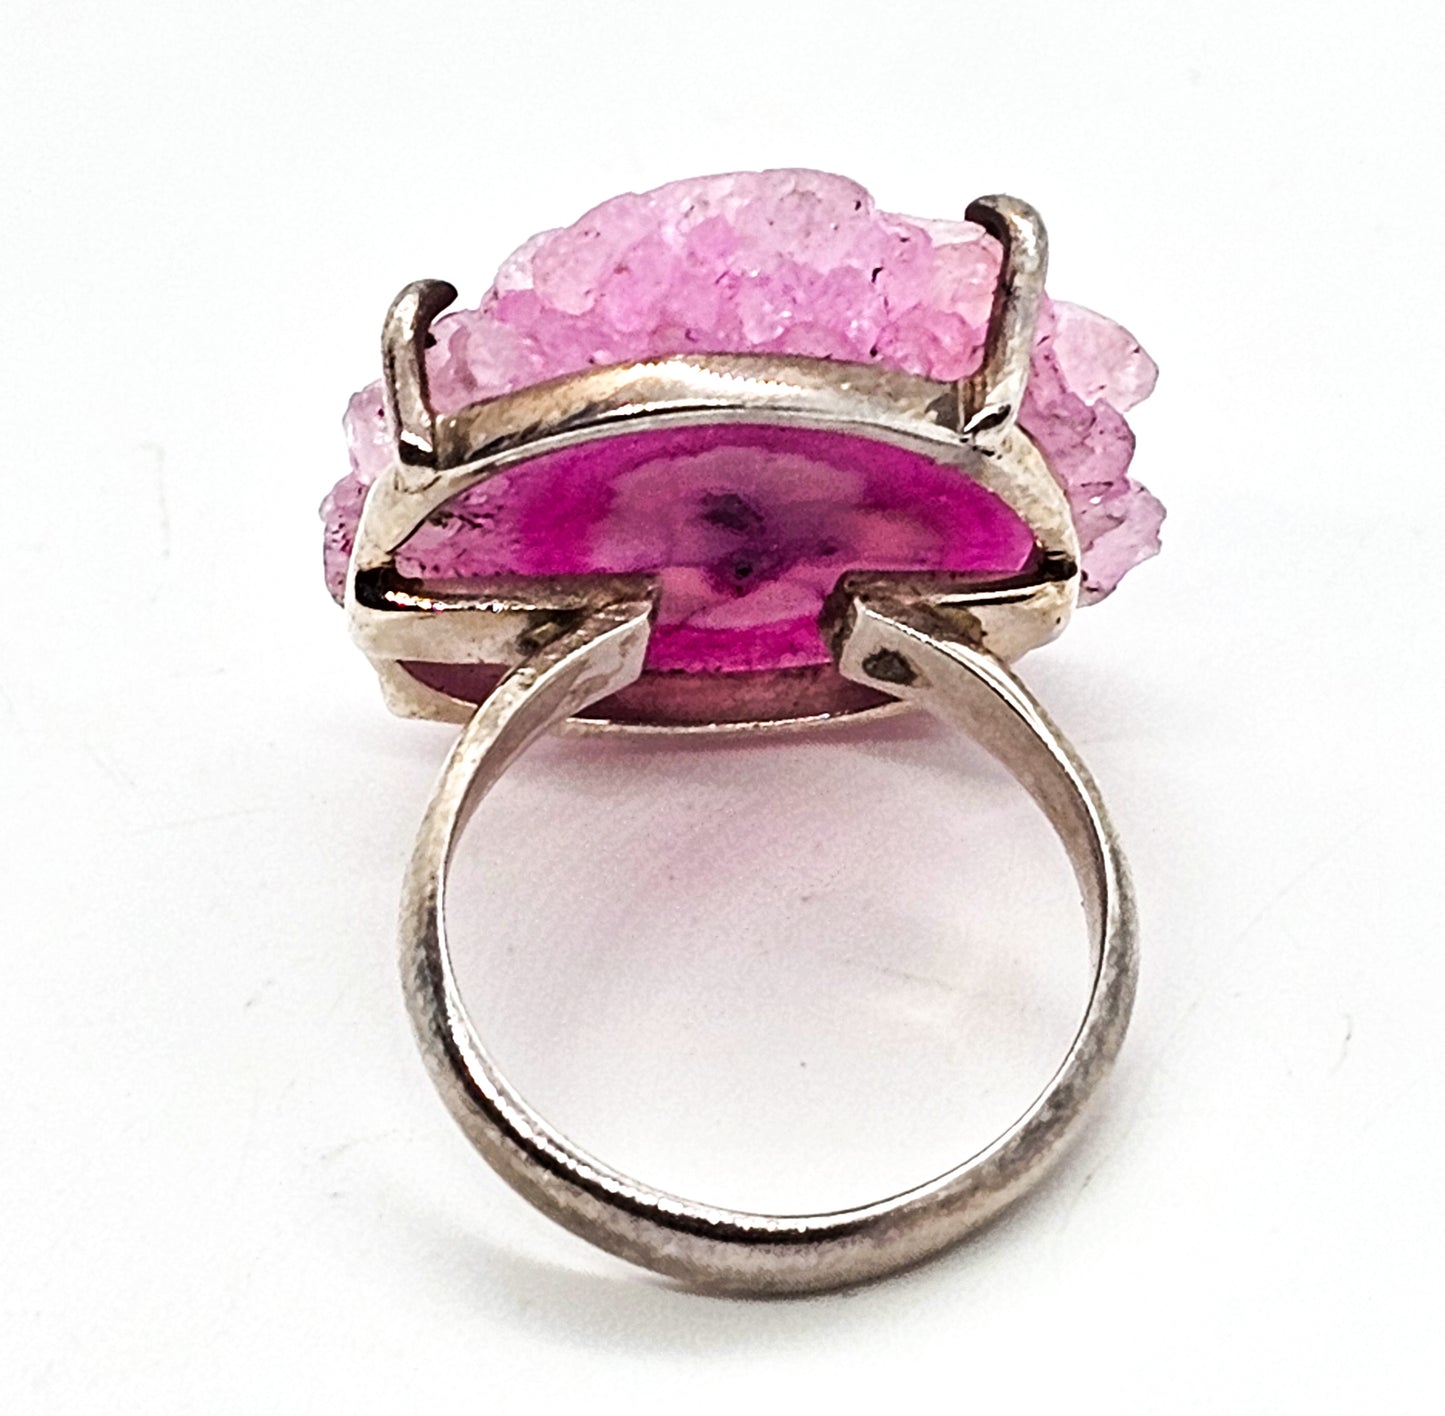 Pink banded quartz agate dyed gemstone sterling silver statement ring size 8